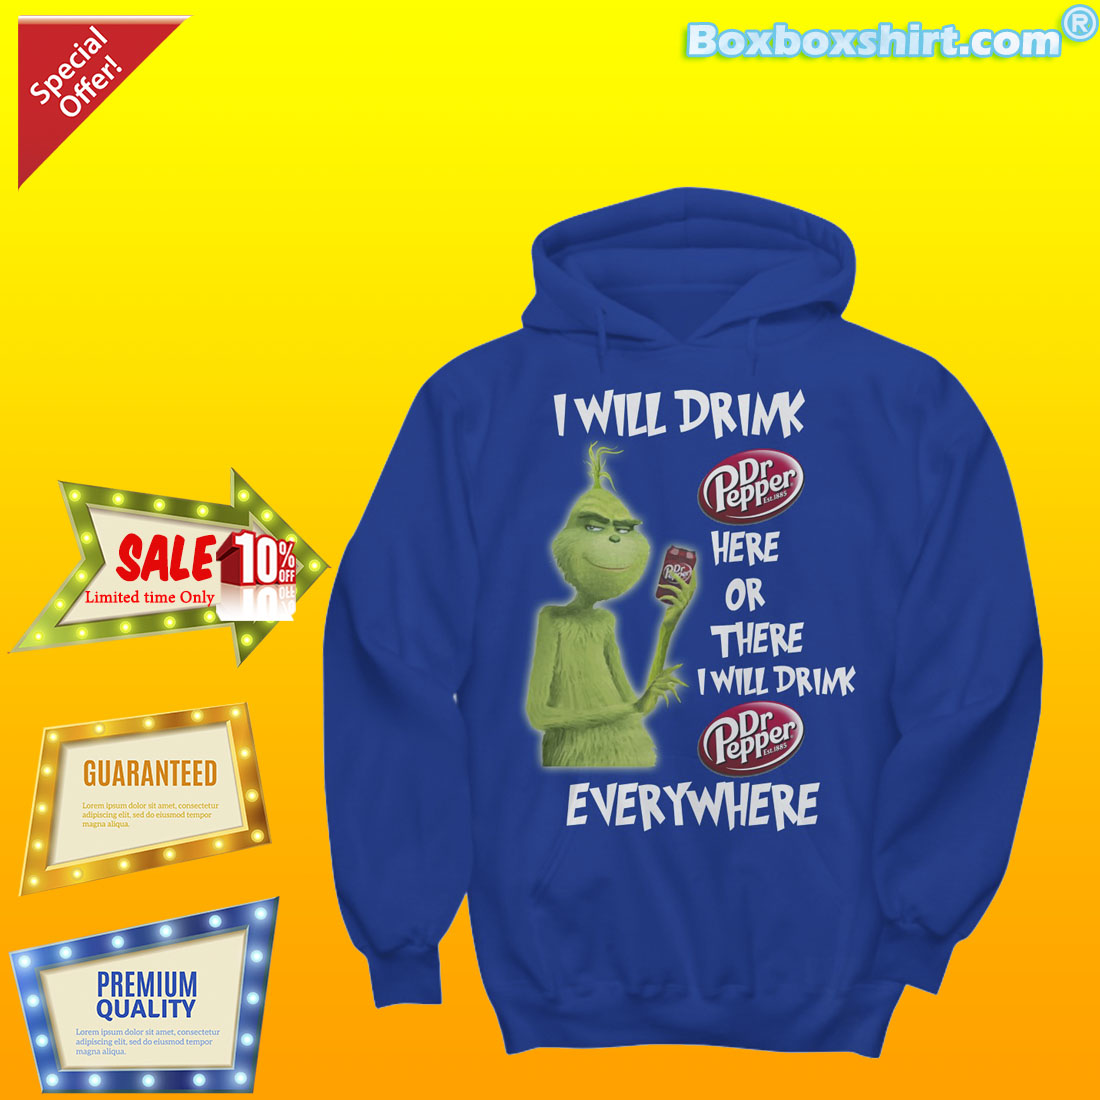 I will drink Dr Pepper here or there everywhere shirt